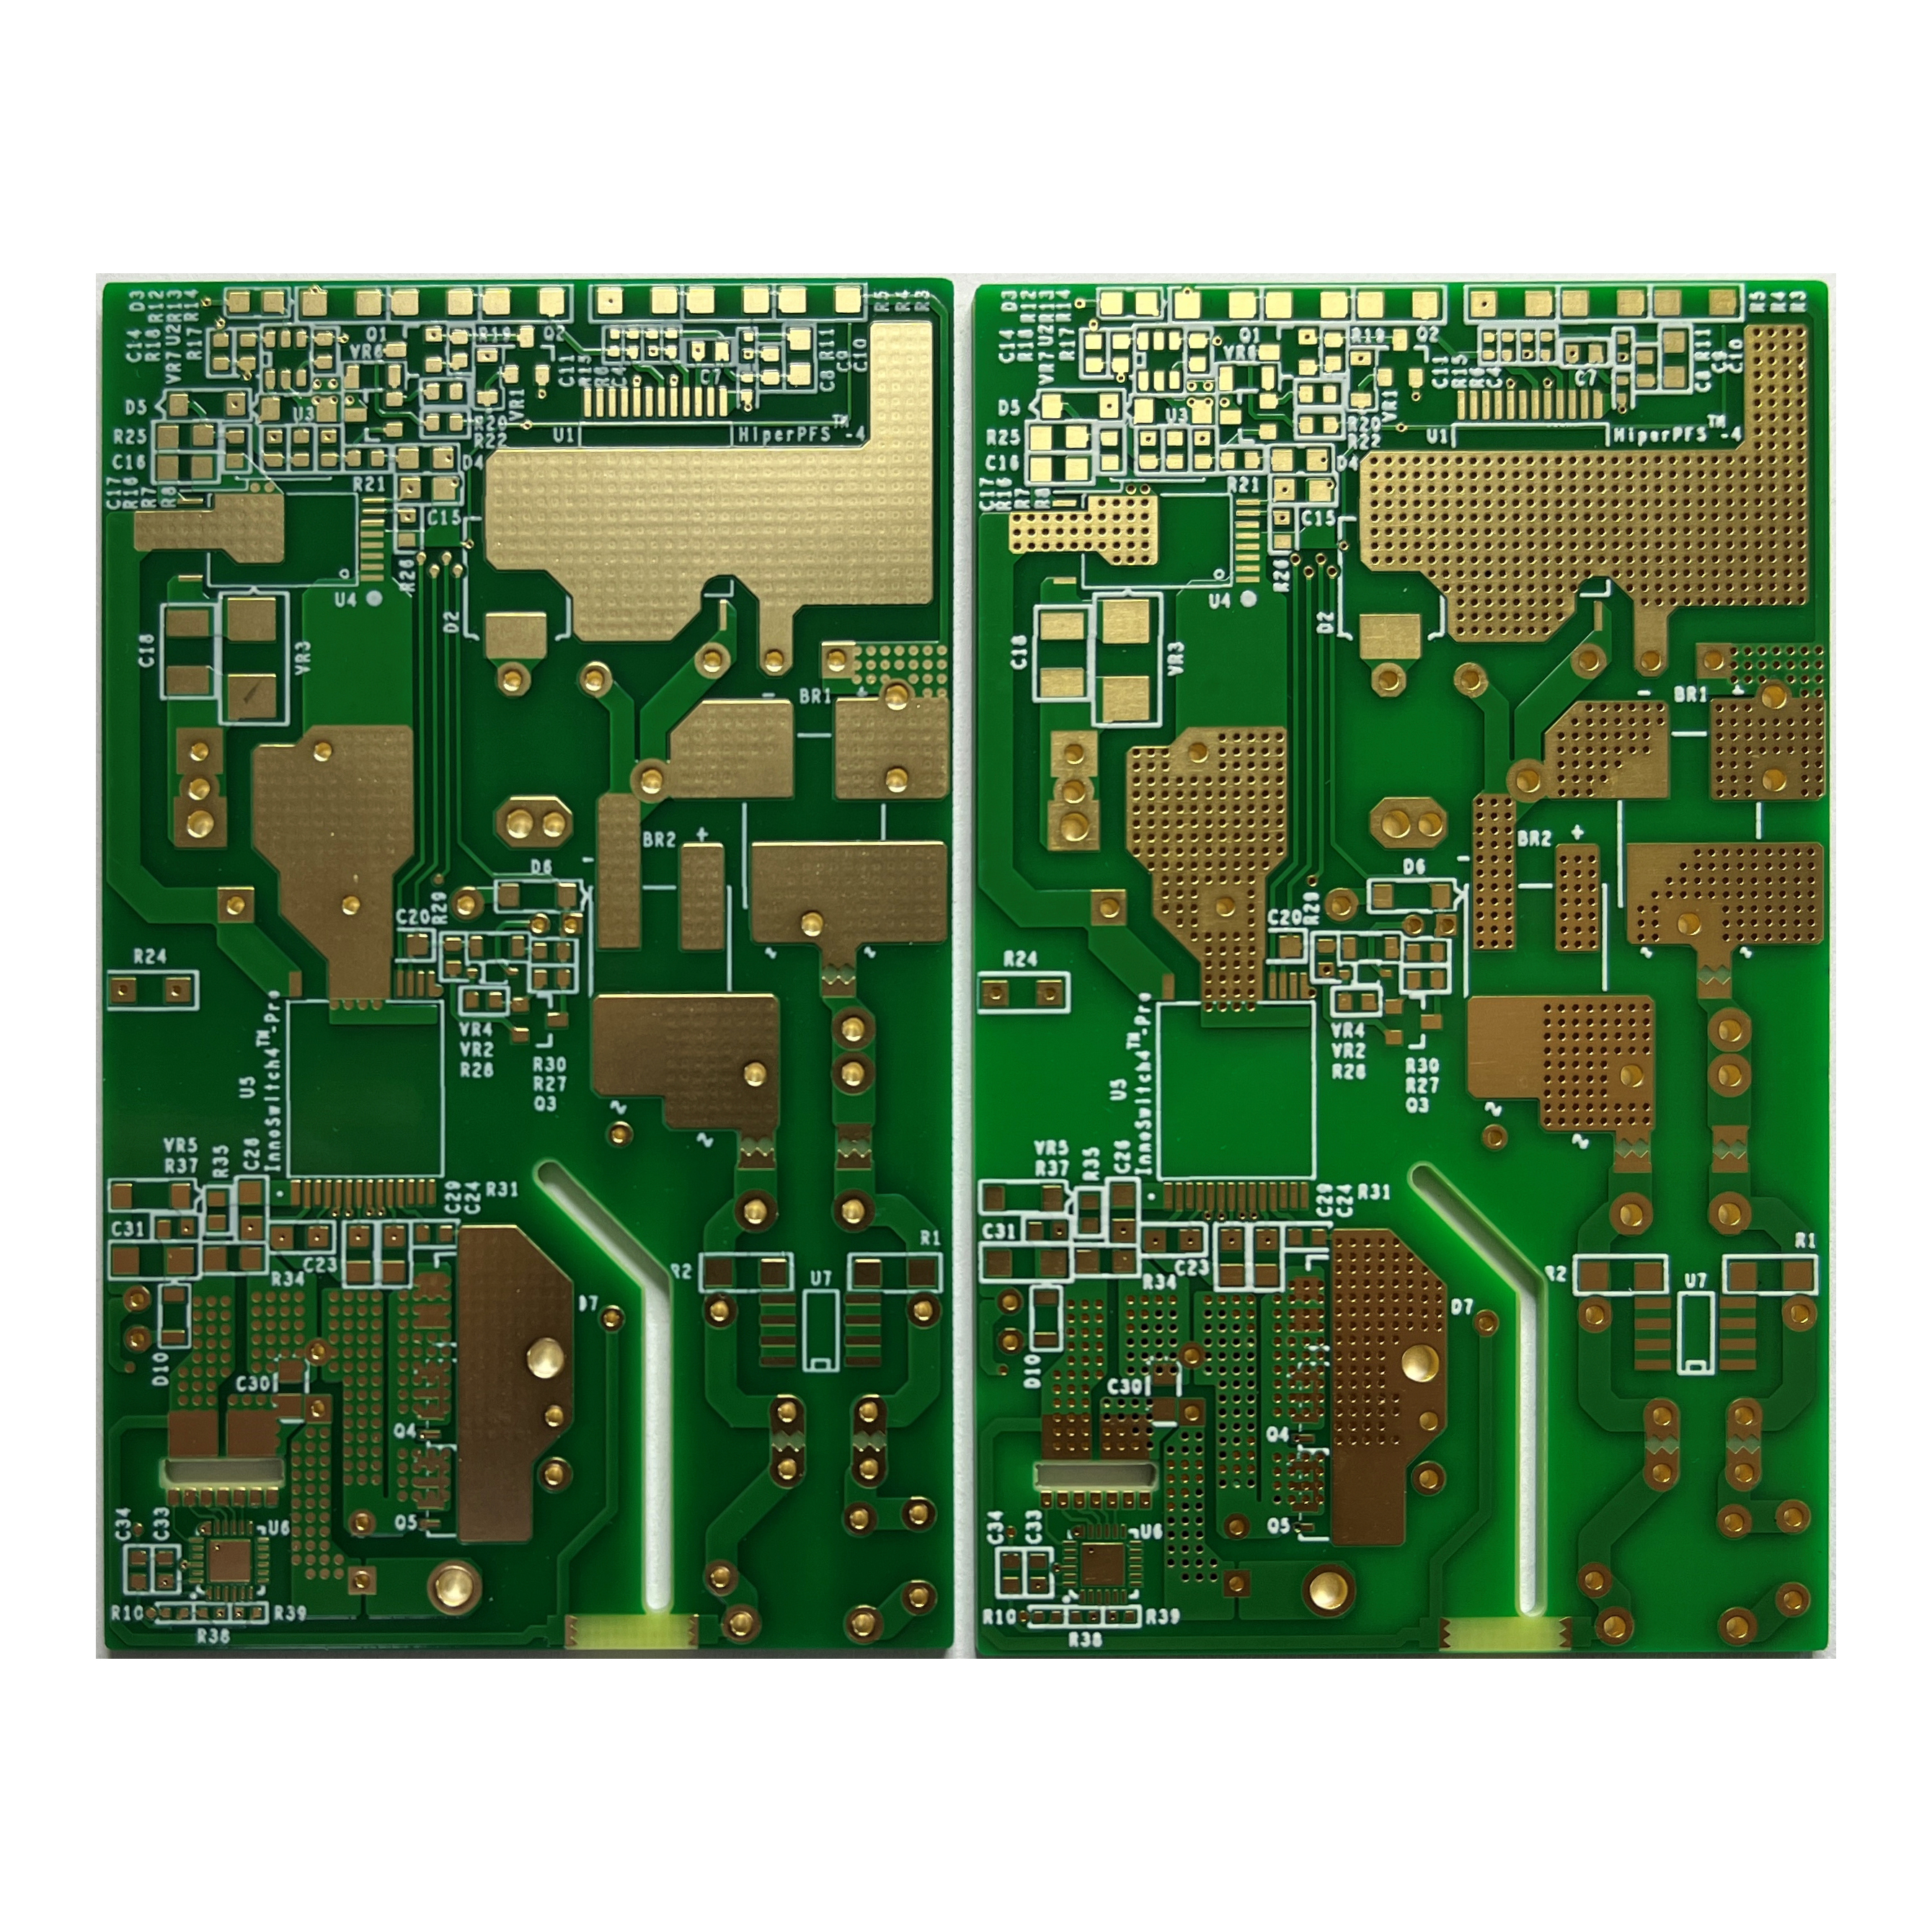 How to calculate PCB design cost?